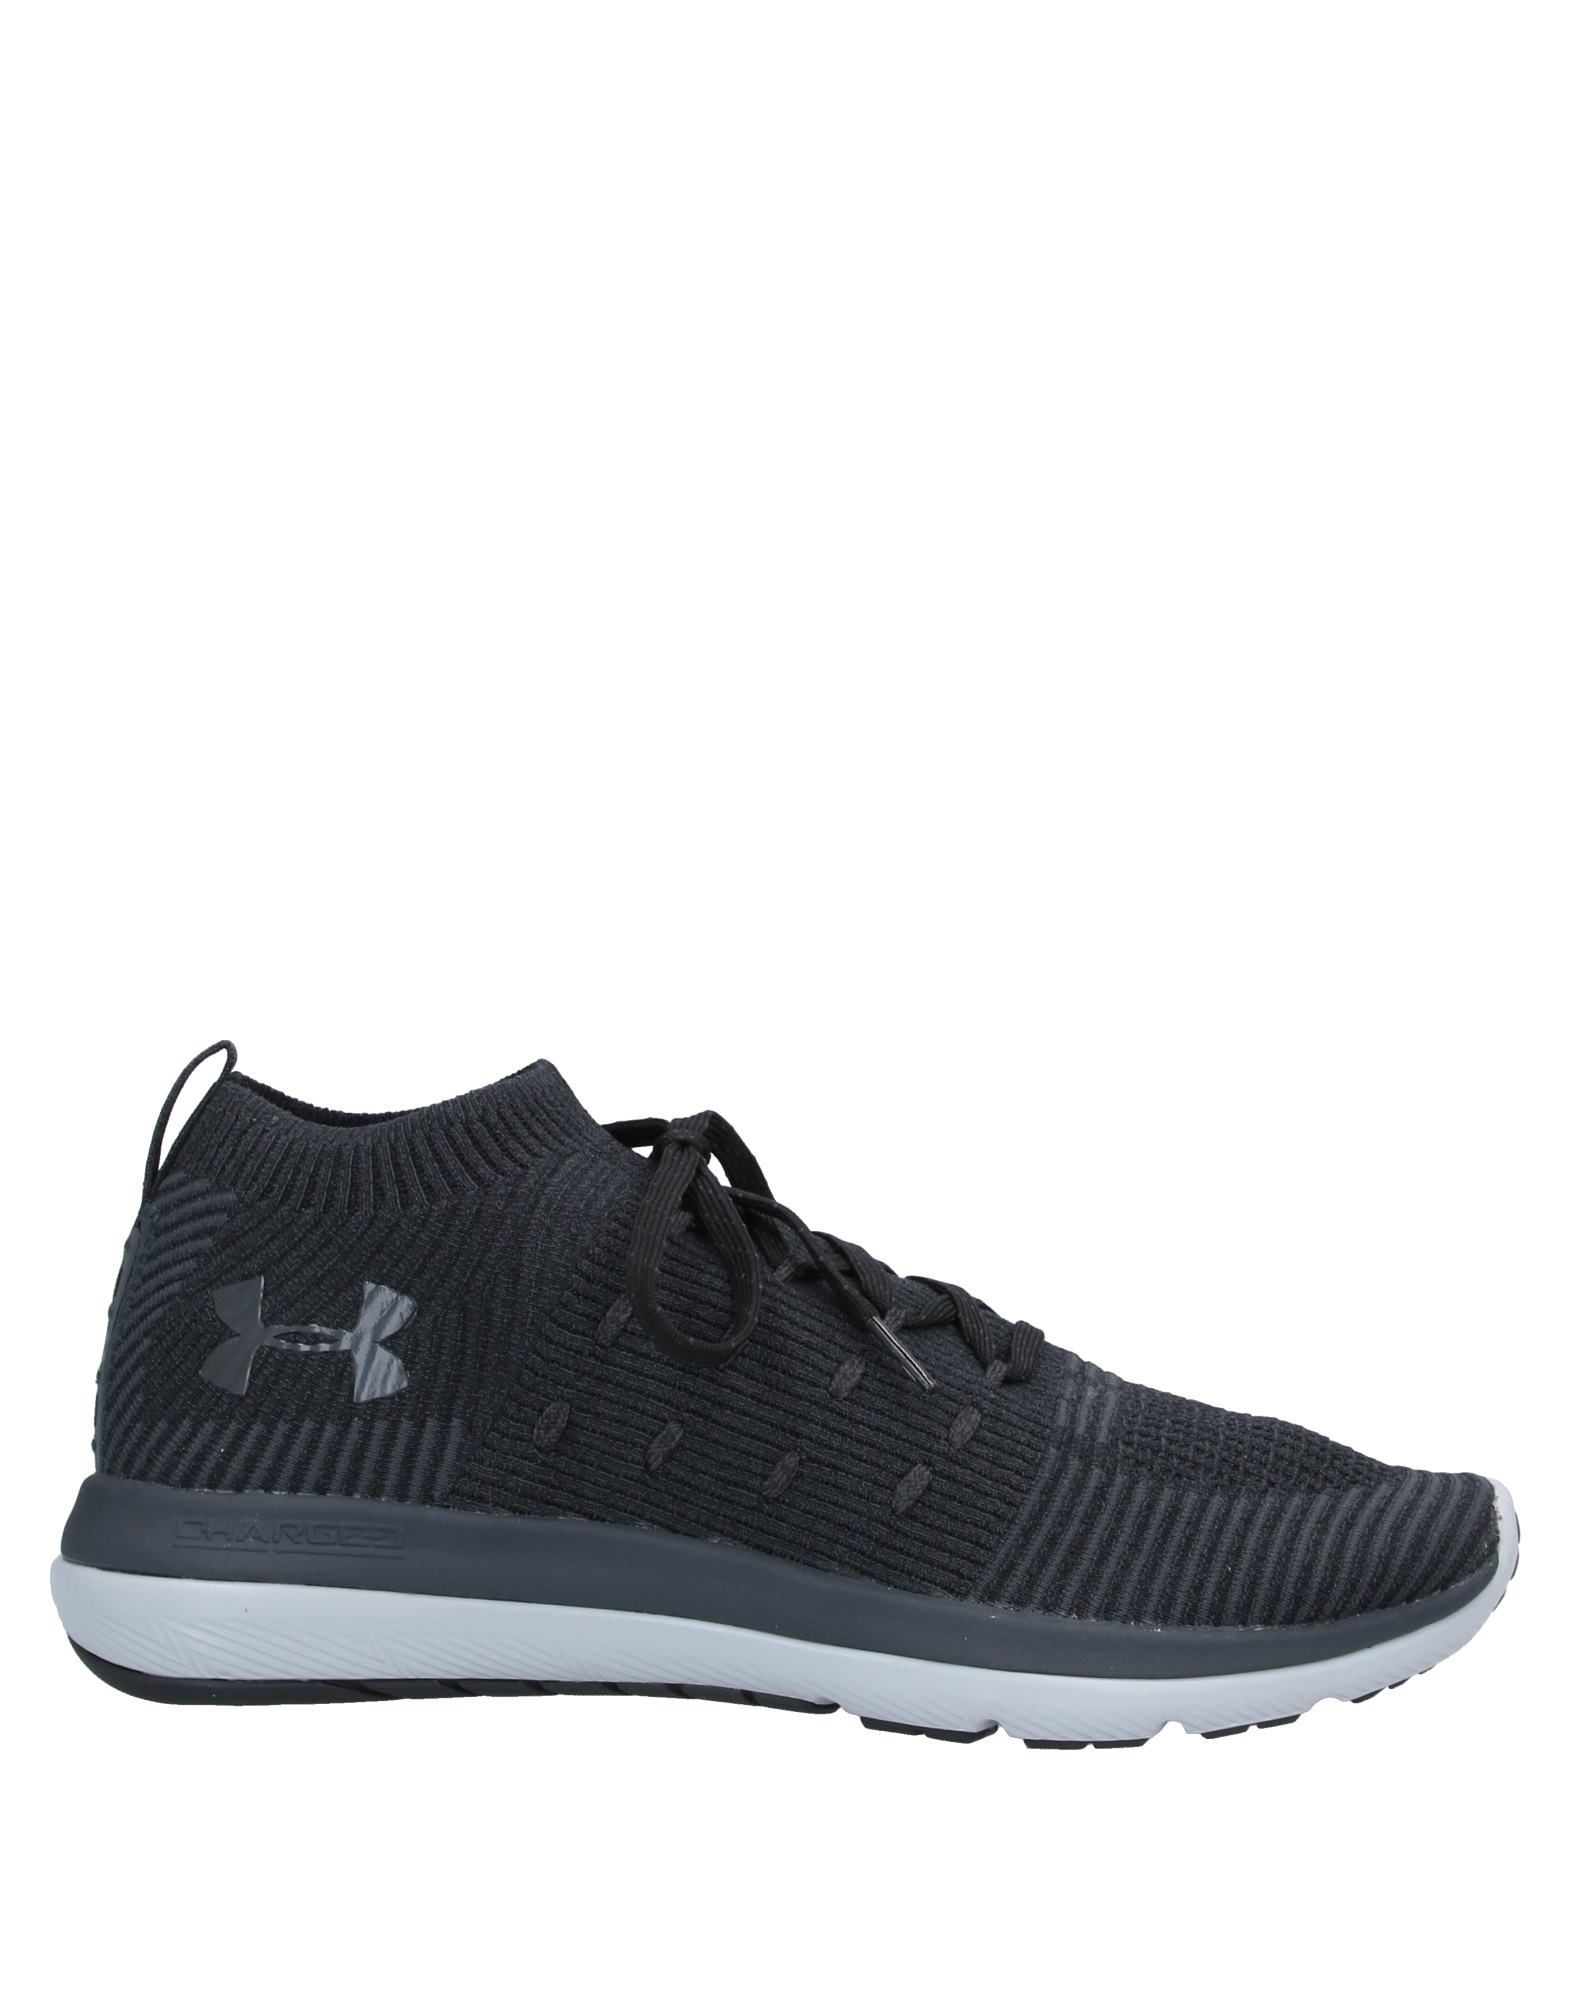 UNDER ARMOUR Sneakers | YOOX (US)